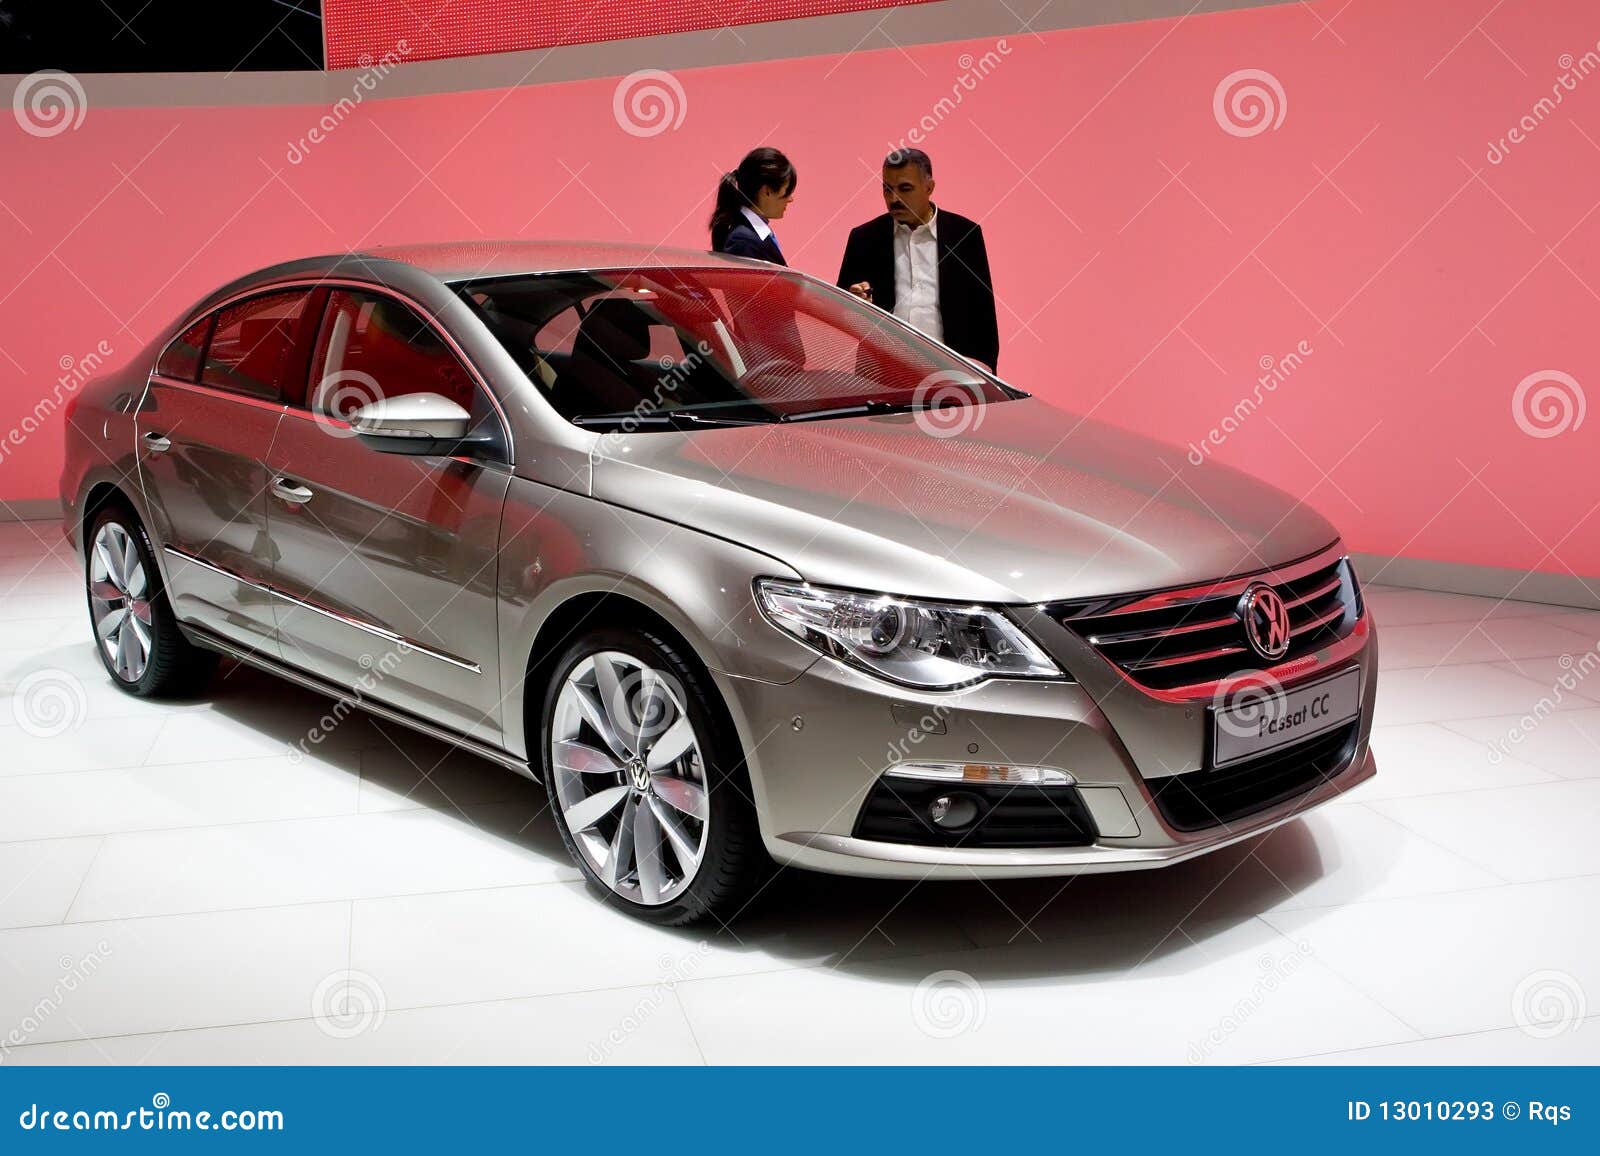 MOSCOW, RUSSIA - AUGUST 27: Metallic Volkswagen Passat cc at Moscow International exhibition InterAuto on August 27, 2008 in Moscow, Russia.